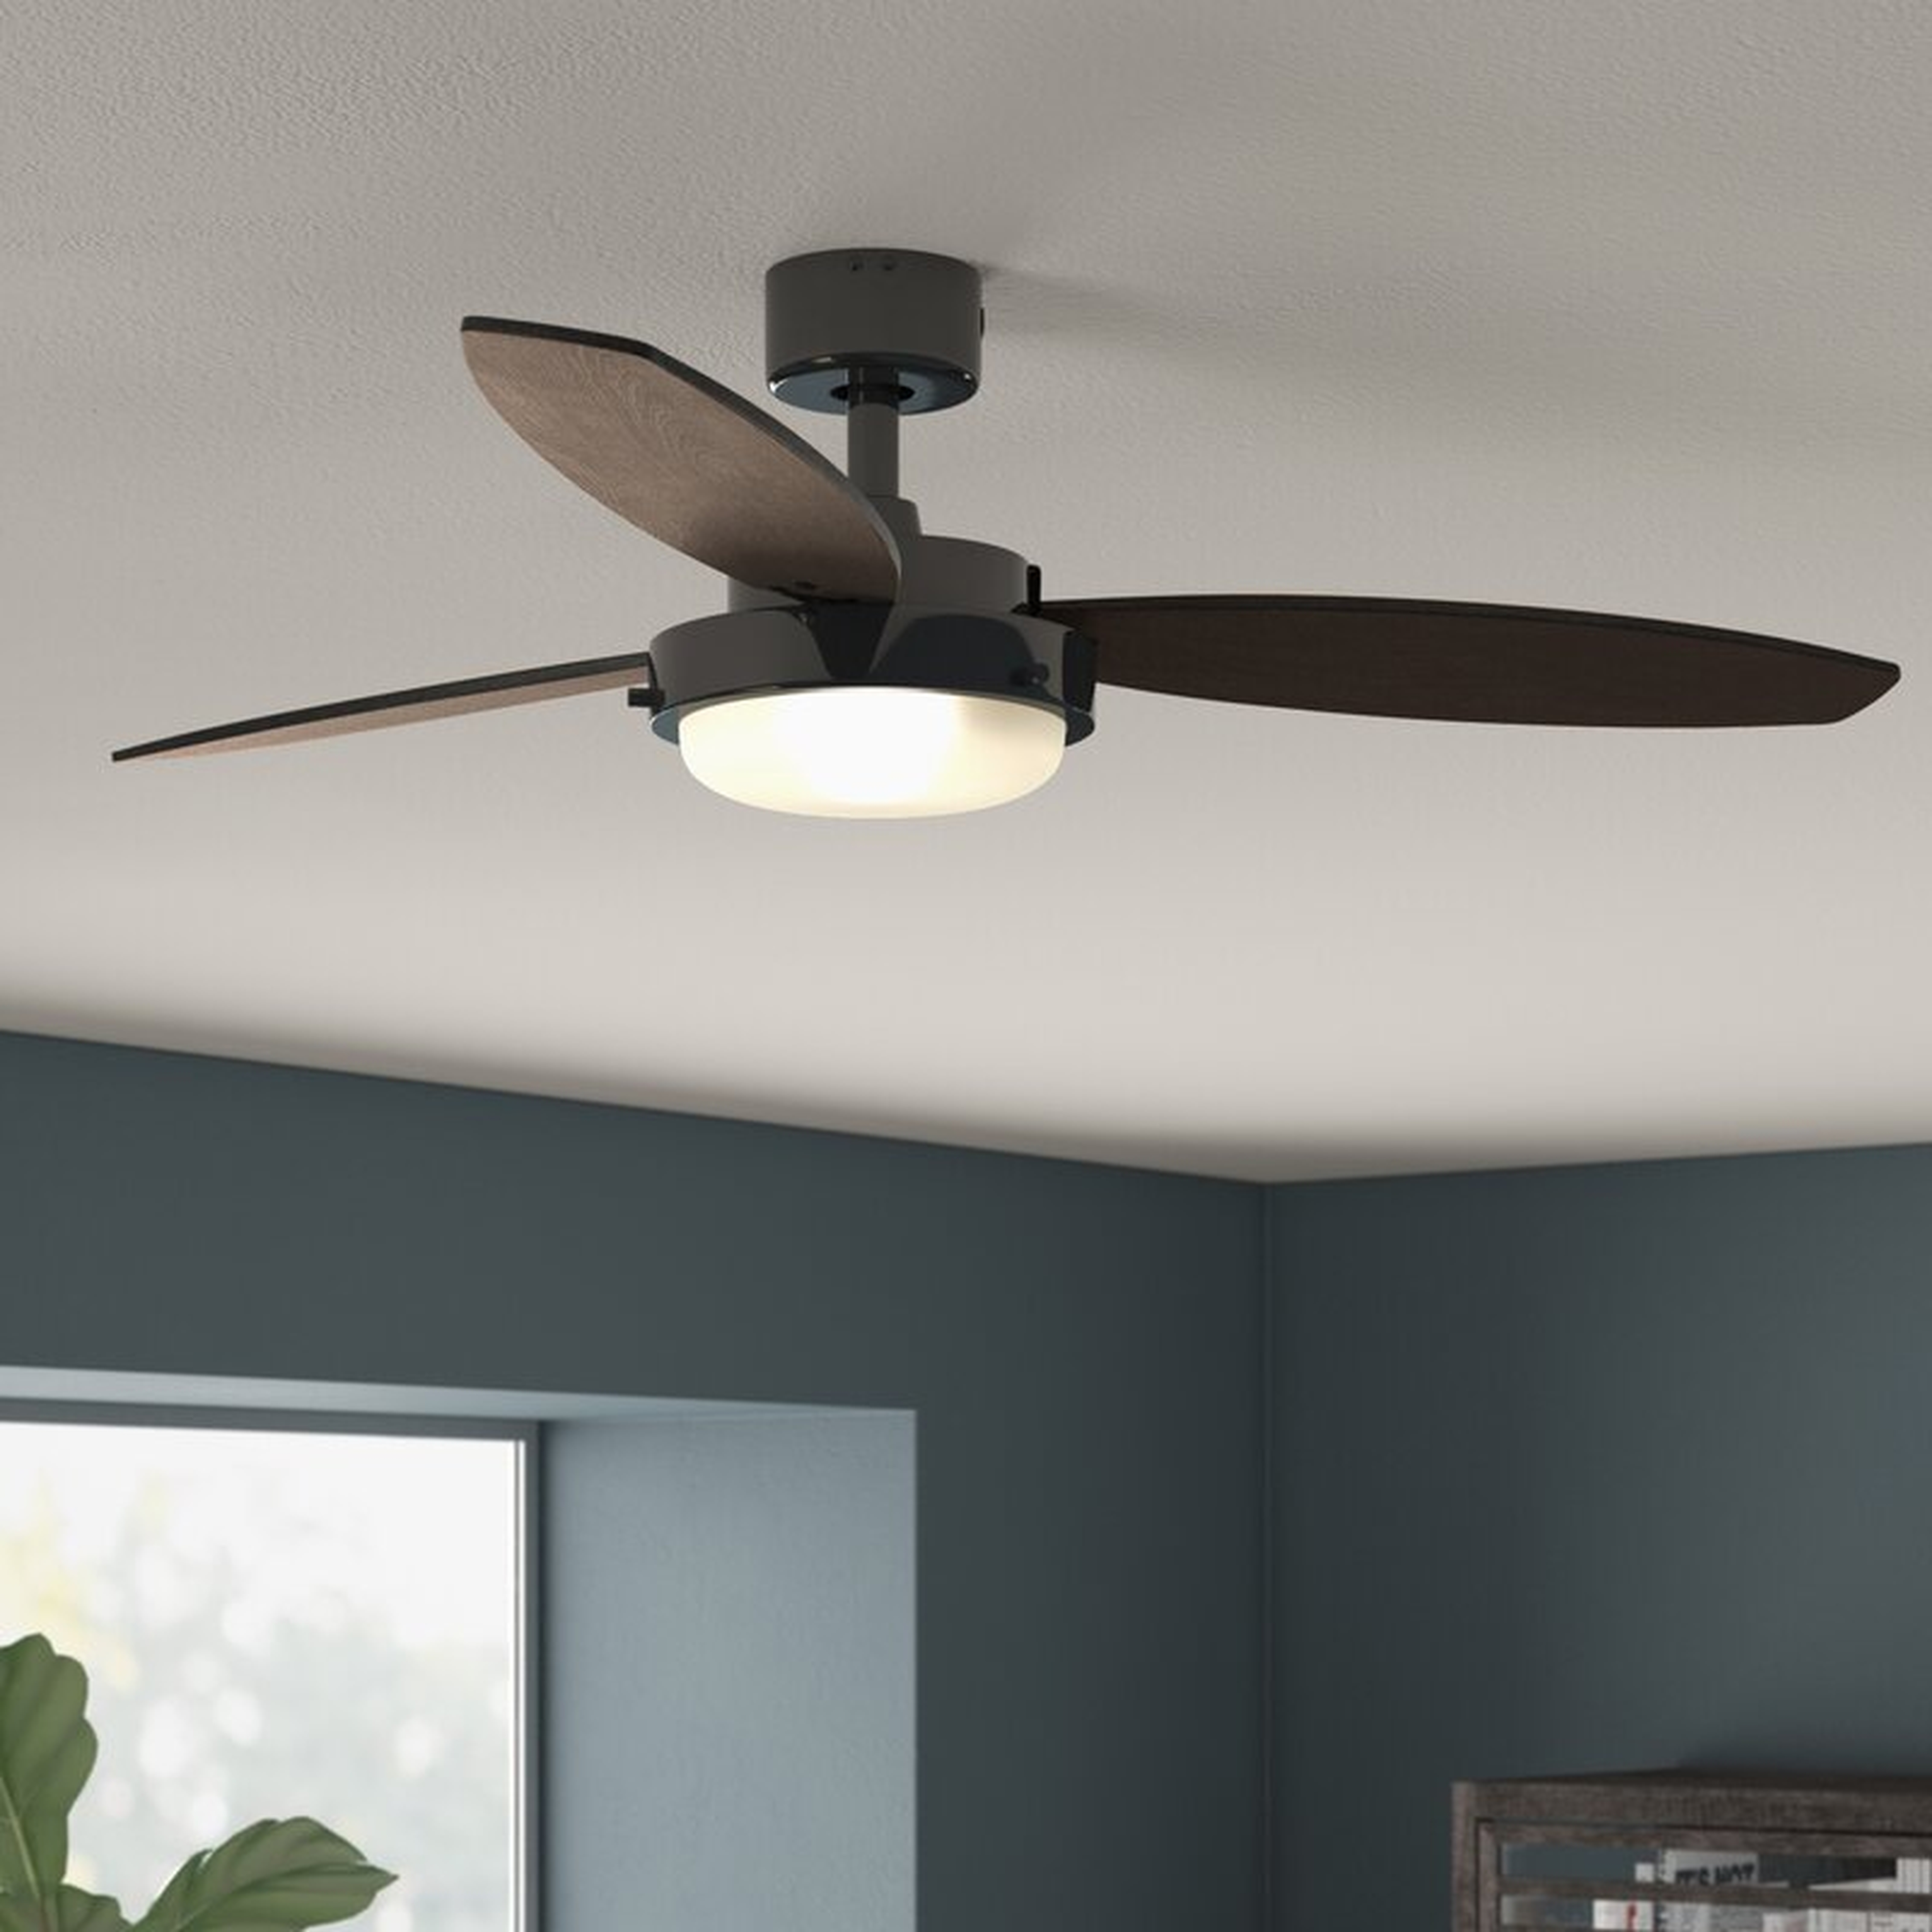 52" Corsa 3 Blade Ceiling Fan with Remote, Light Kit Included - Wayfair